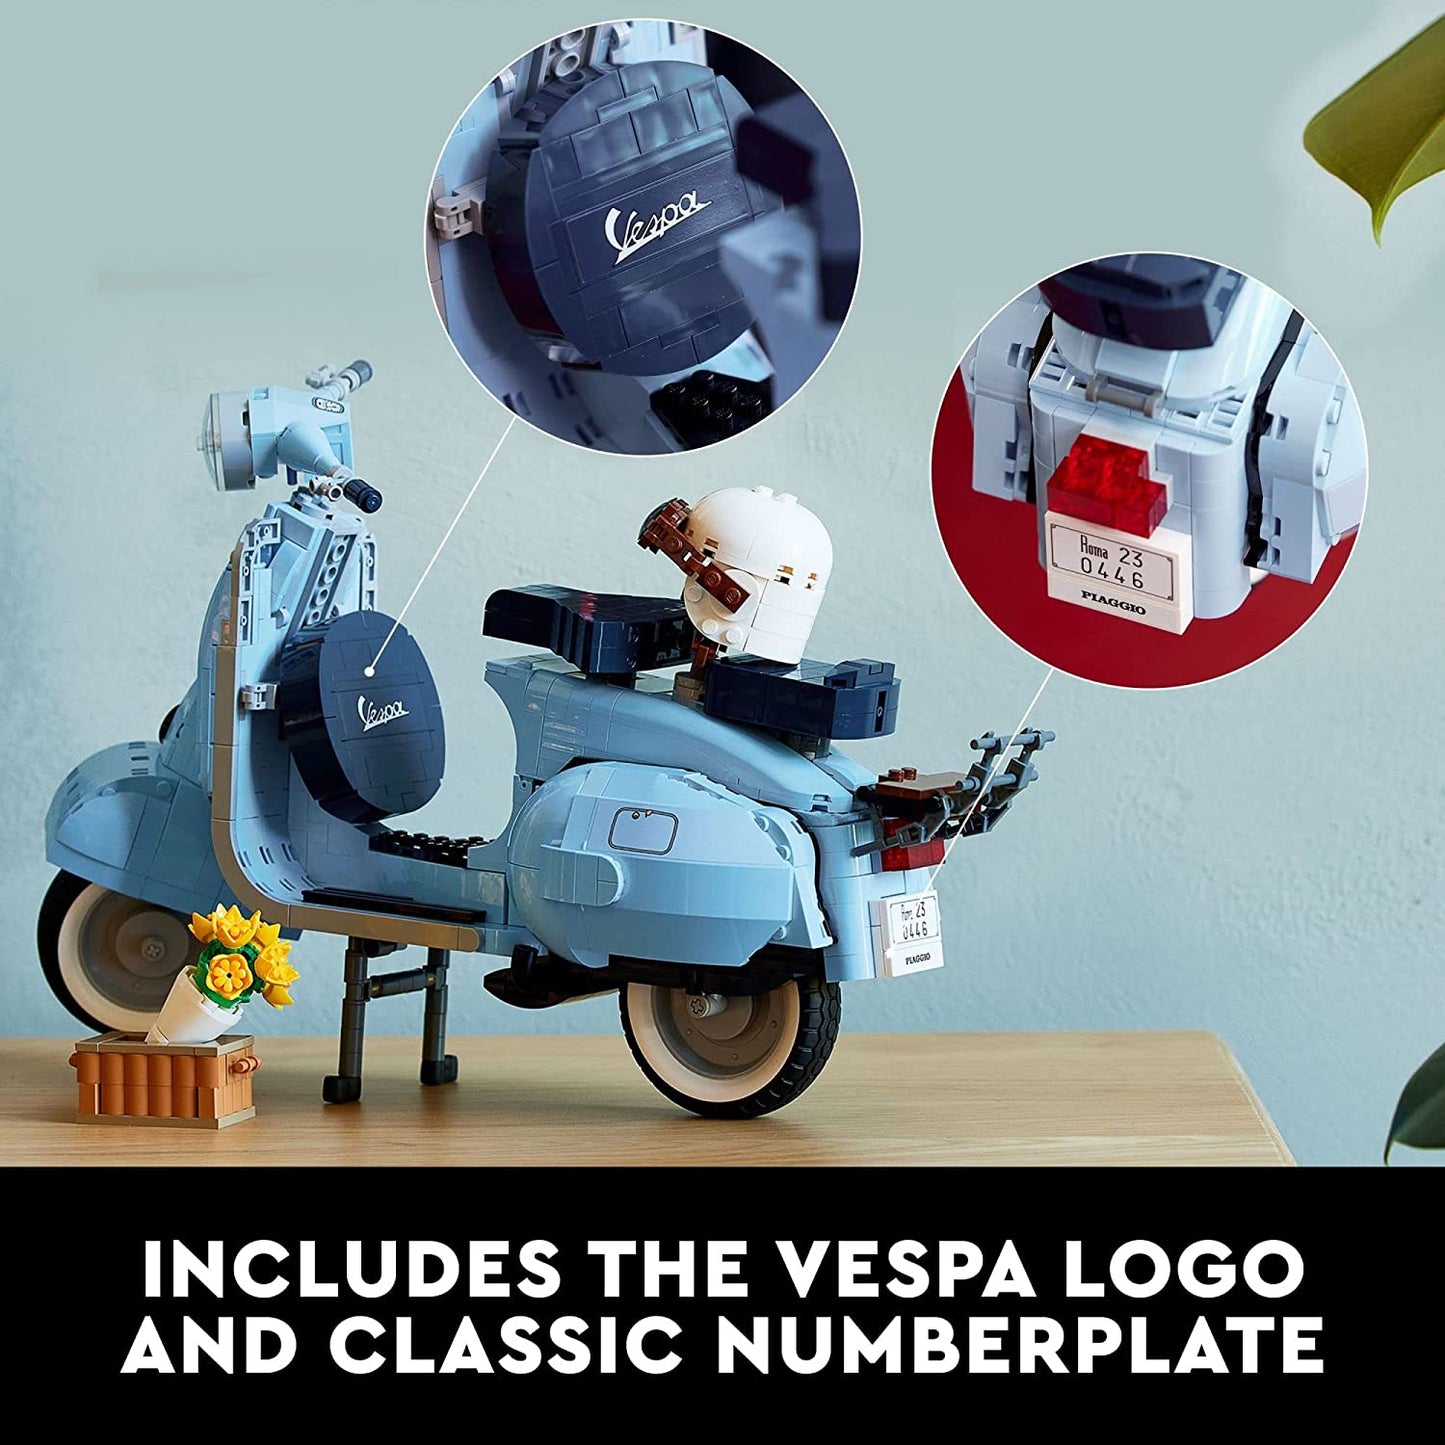 LEGO - Icons Vespa 125 Scooter 10298